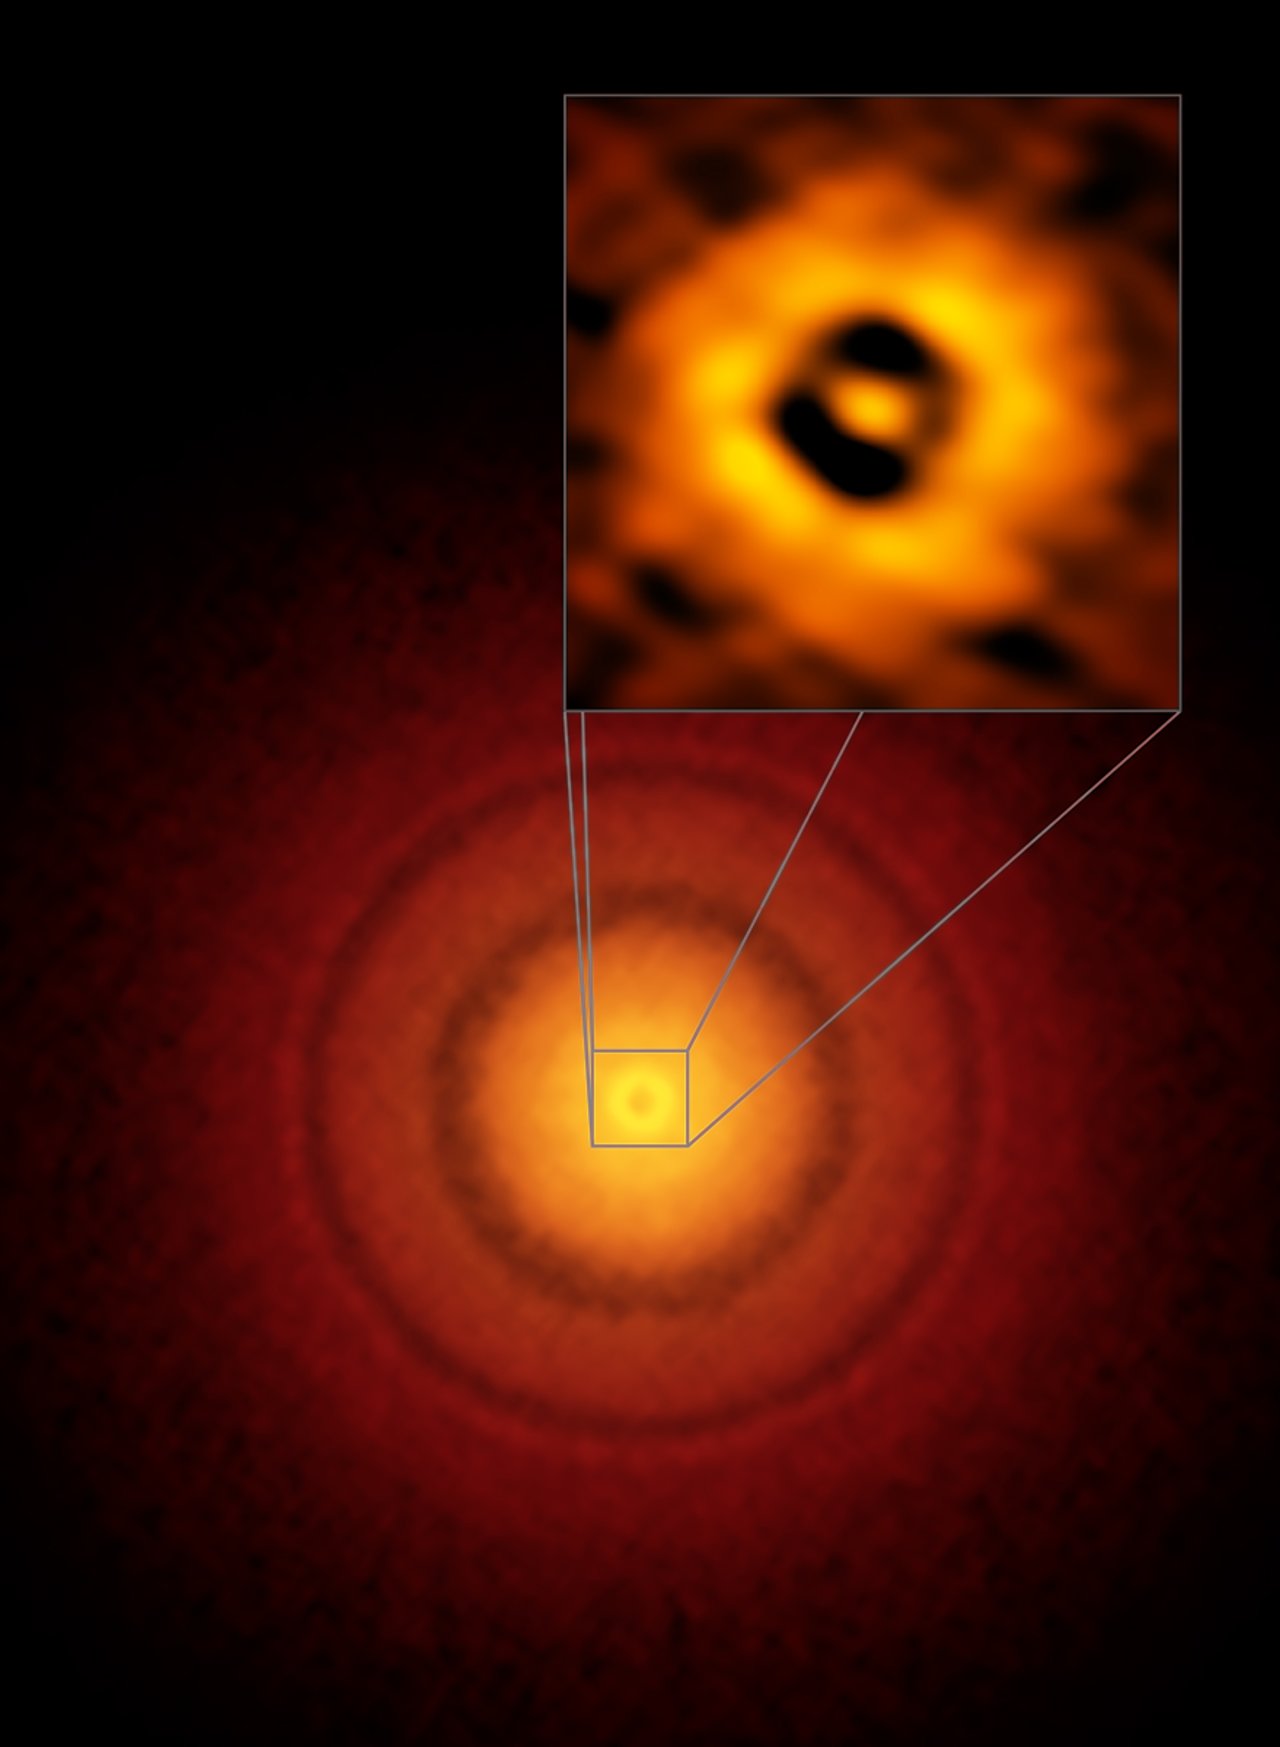 ALMA image of the planet-forming disc around the young, Sun-like